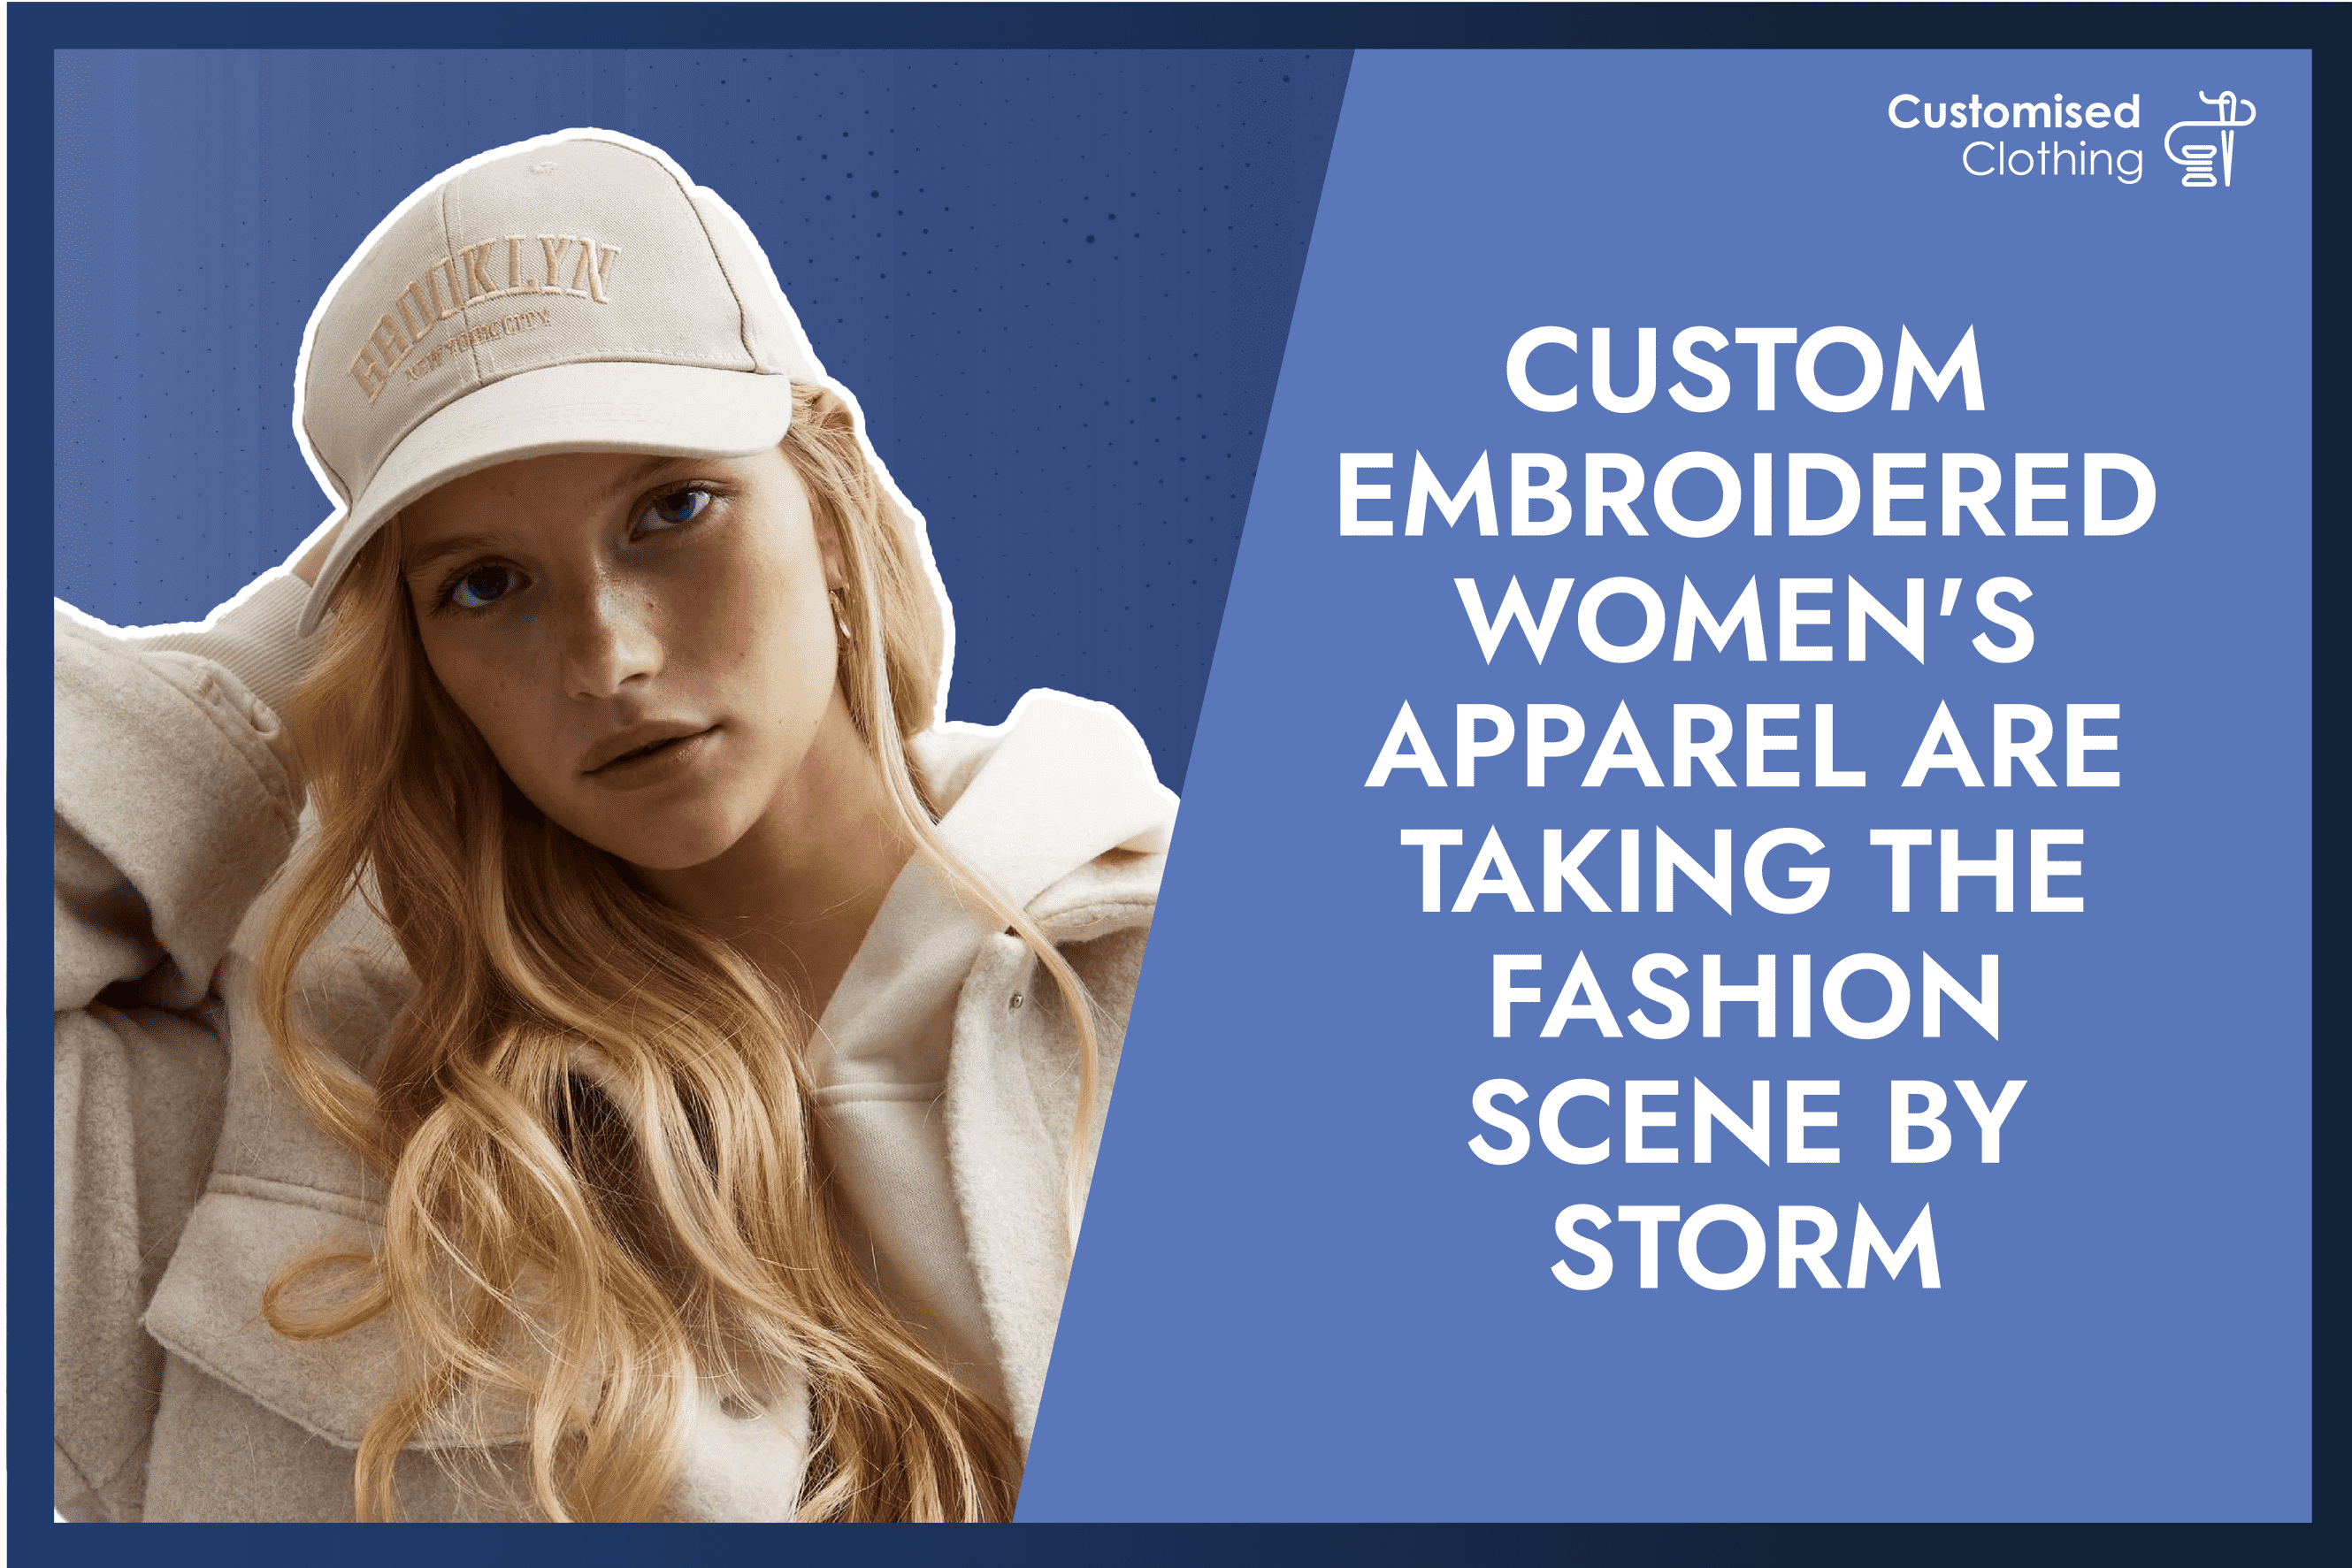 Custom Embroidered Women's Apparel Are Taking The Fashion Scene by Storm